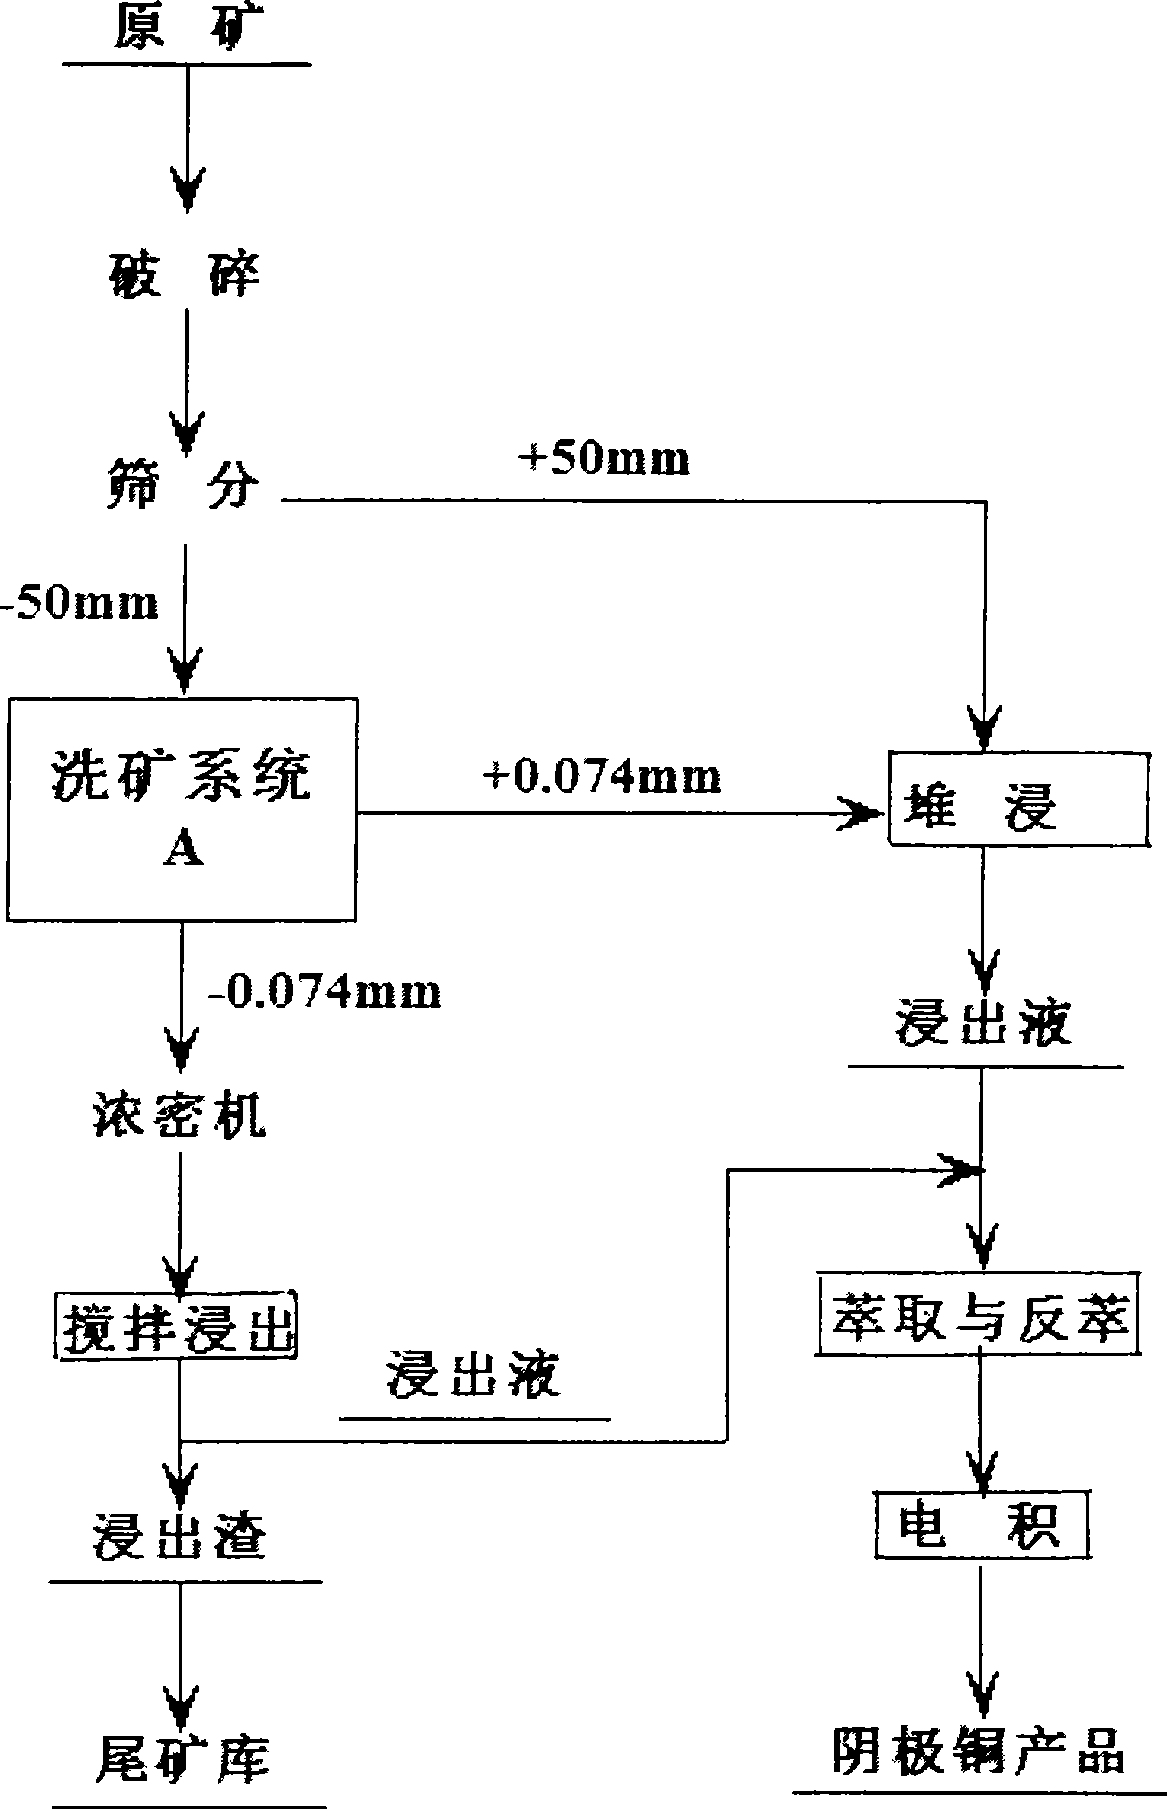 Wet processing process of high mud cupric oxide mine at high-cold area